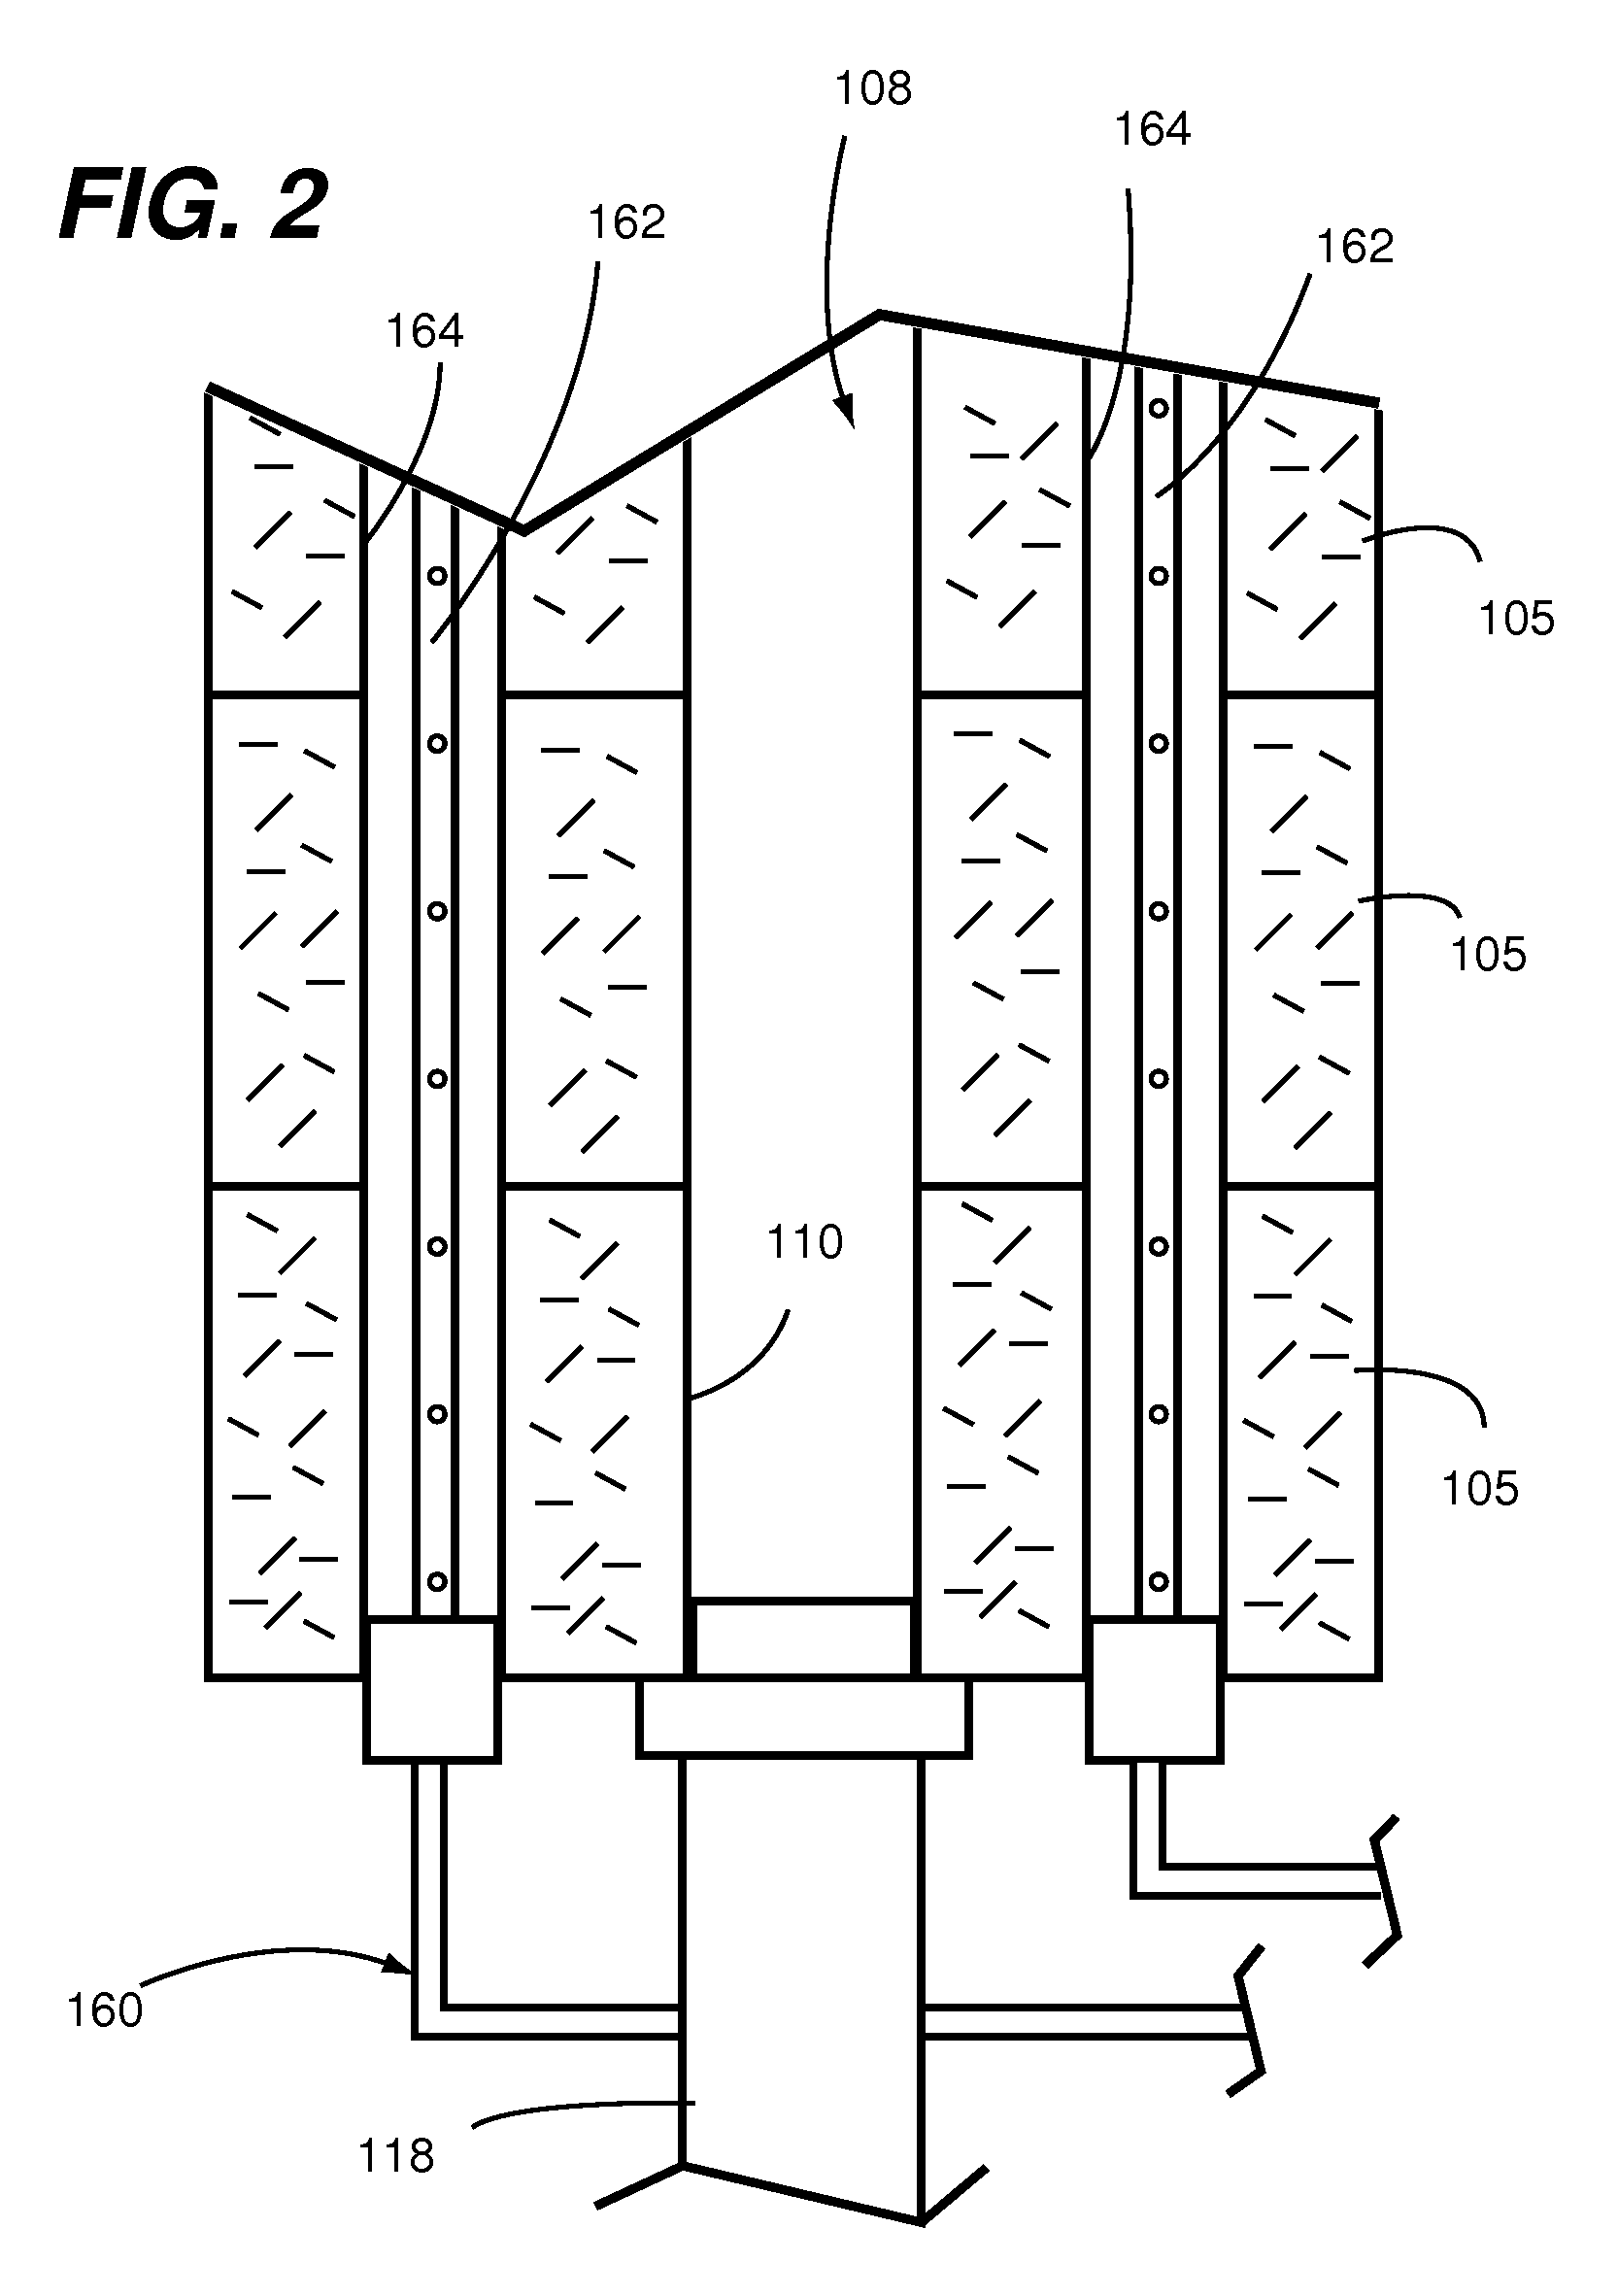 Method and apparatus for climatic conditioning of space within a building structure